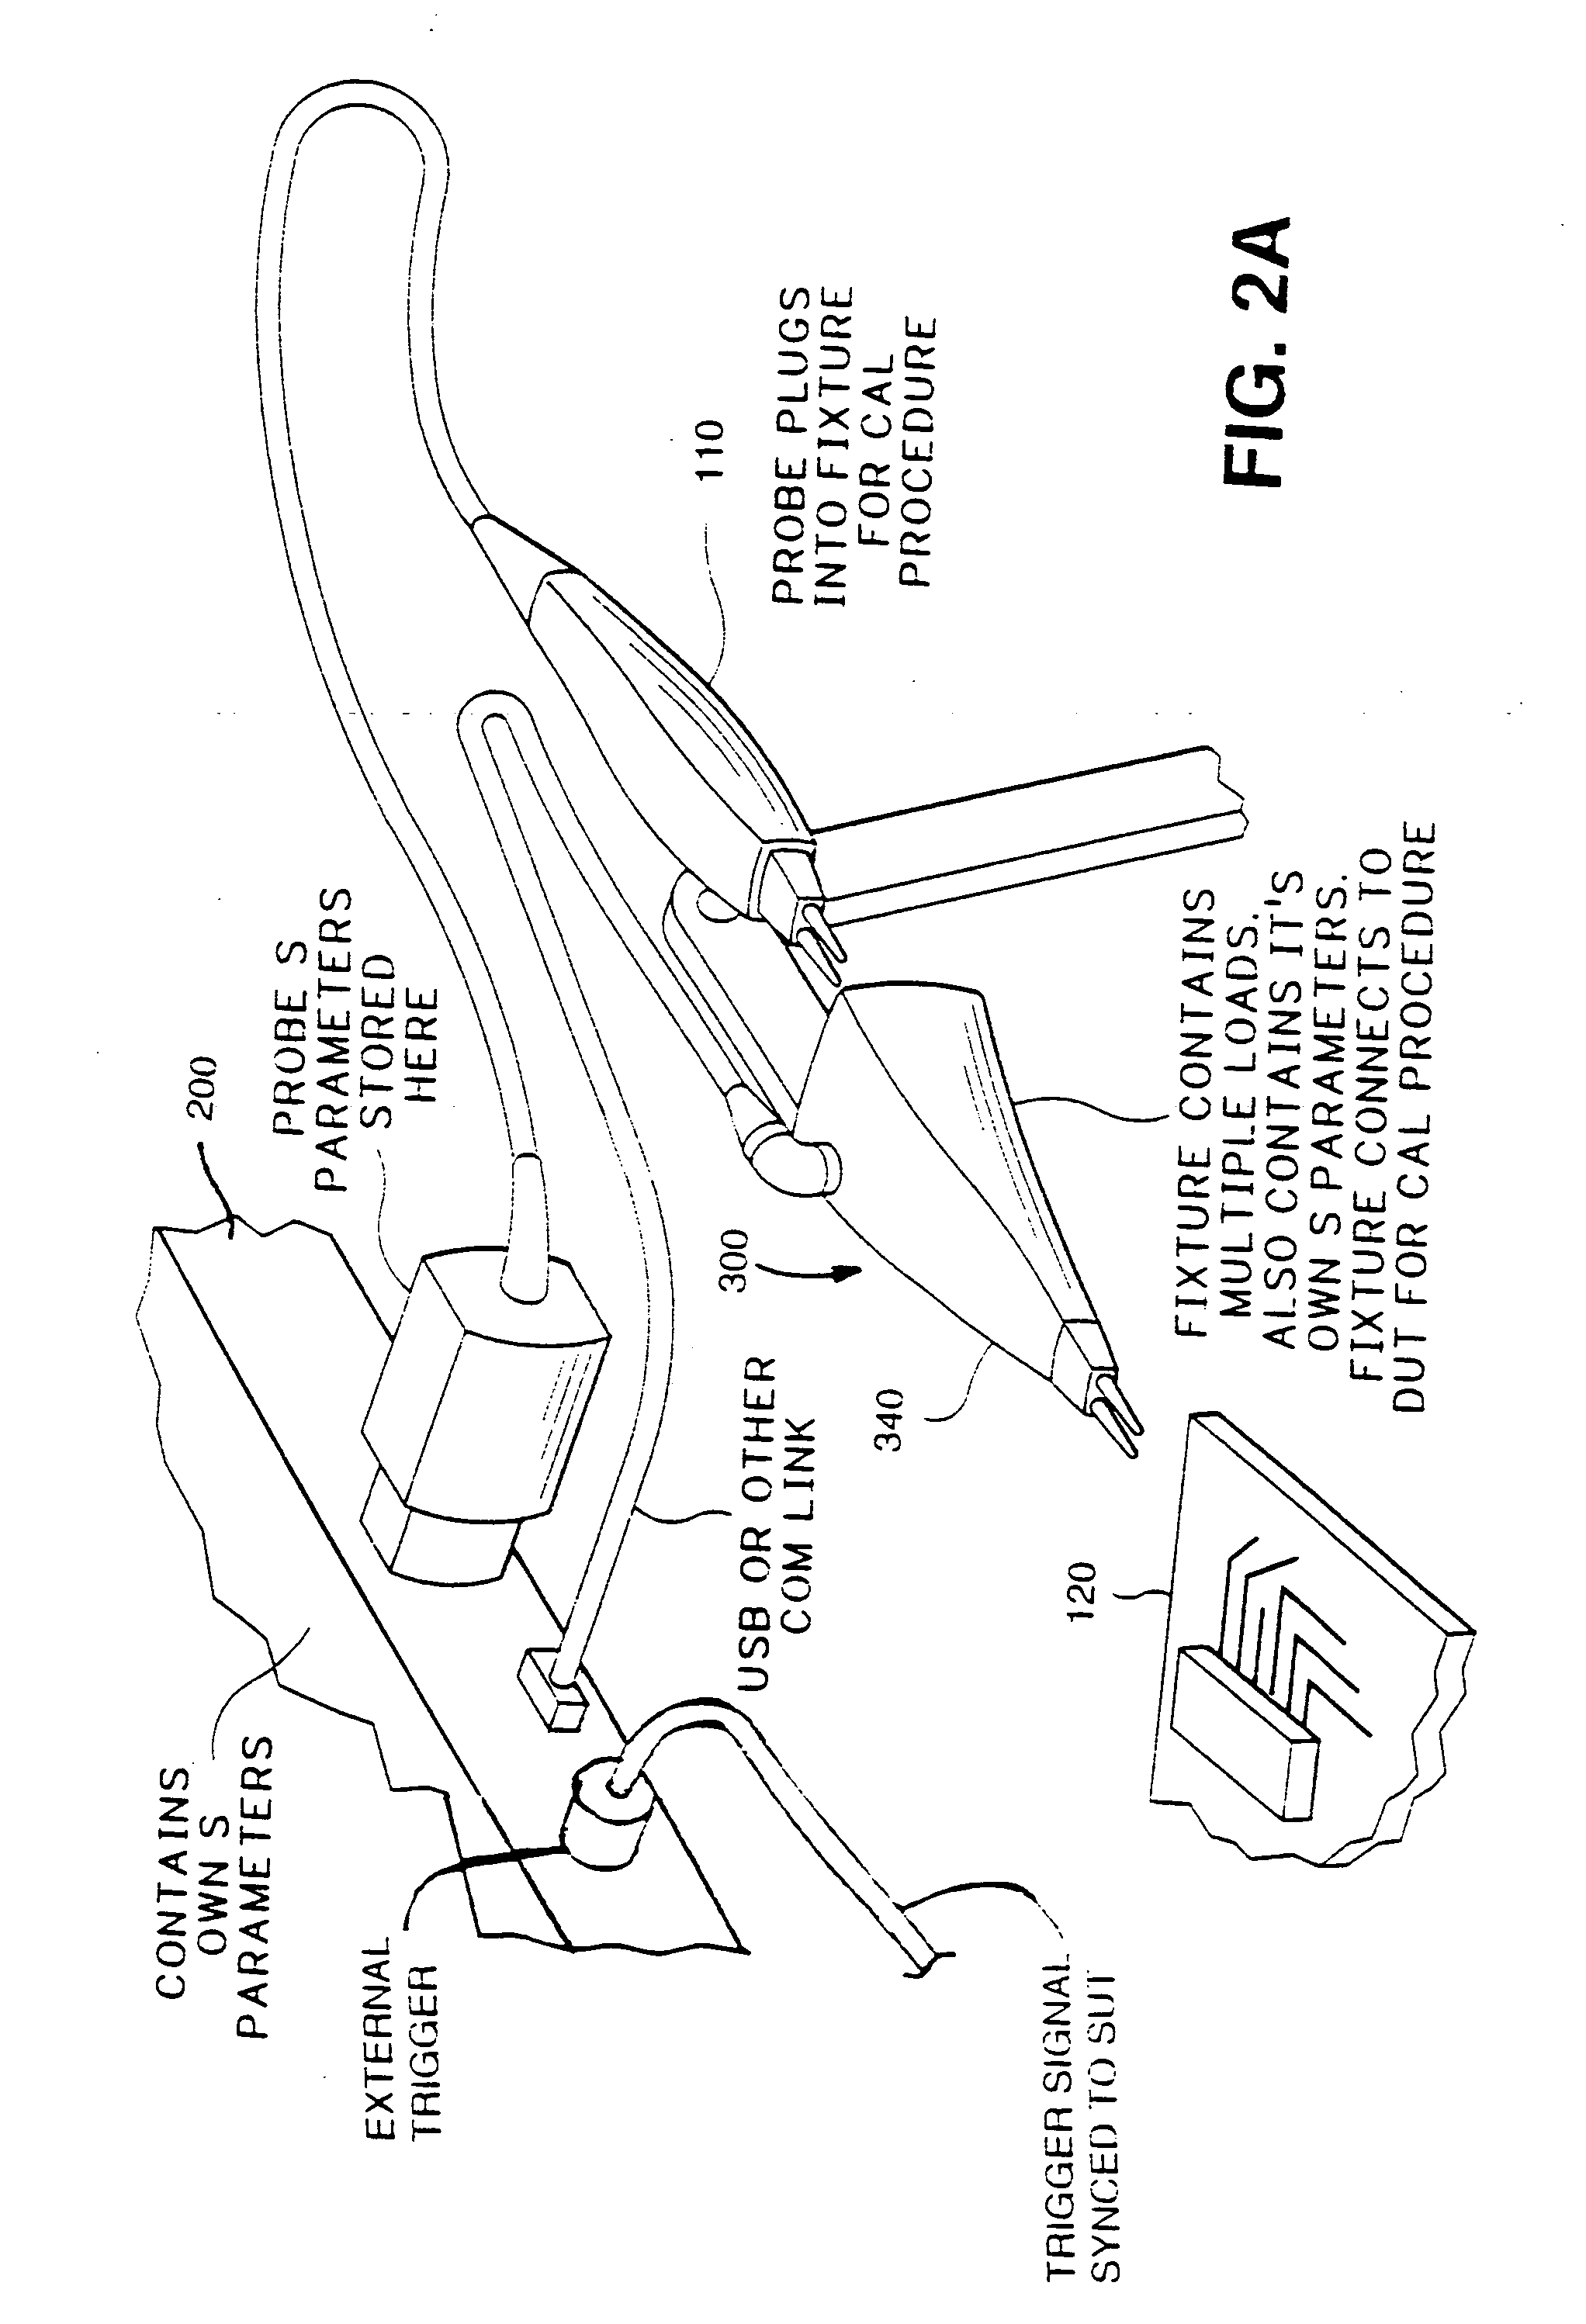 Signal analysis system and calibration method